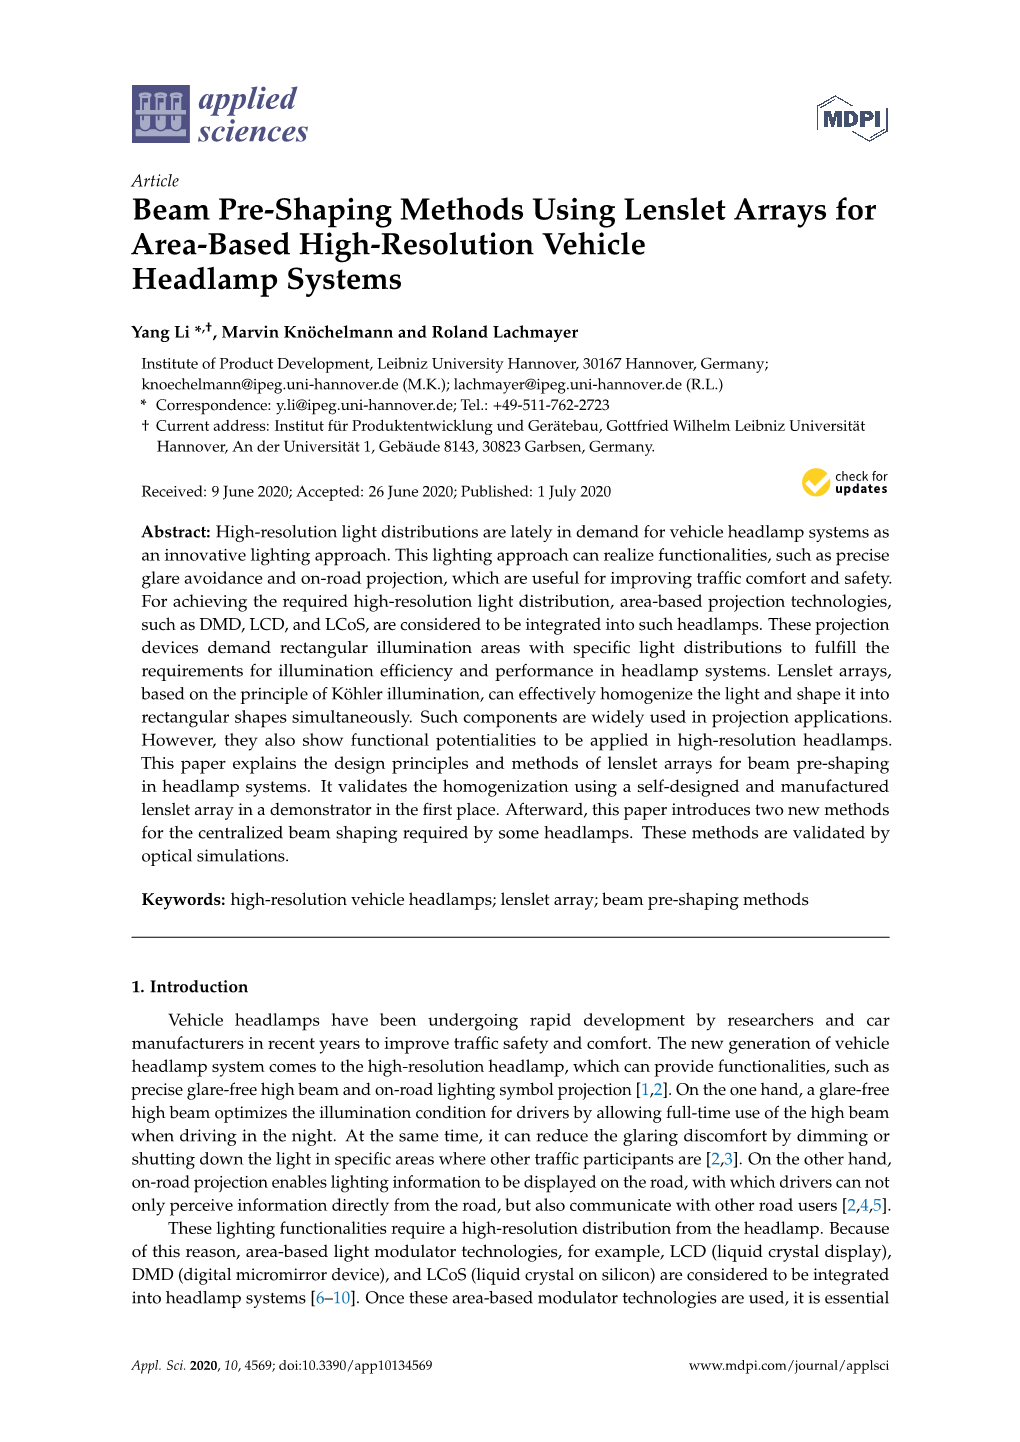 Beam Pre-Shaping Methods Using Lenslet Arrays for Area-Based High-Resolution Vehicle Headlamp Systems